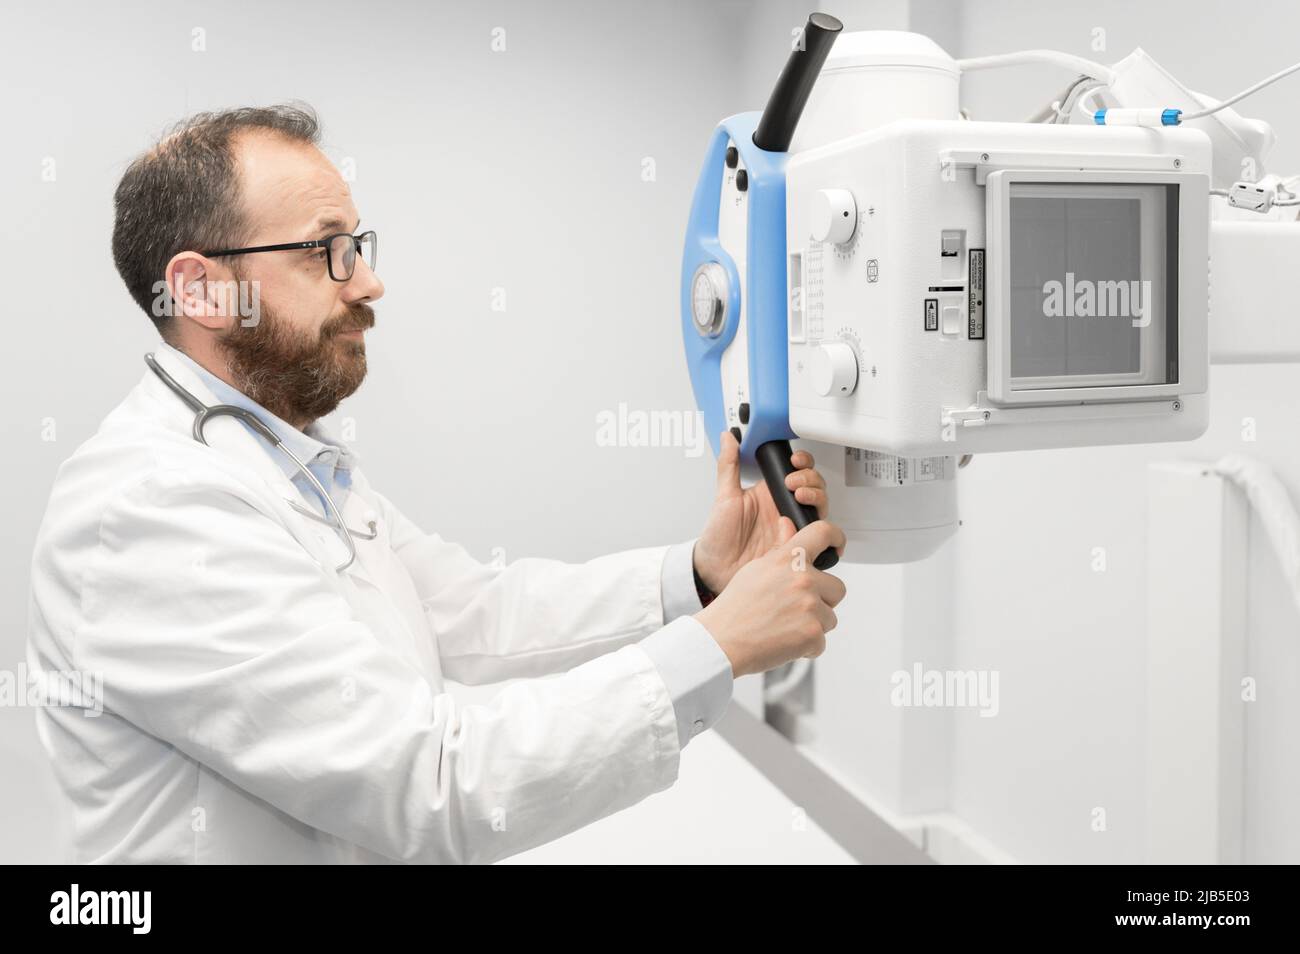 Doctor operating X-ray machine in radiology department. High quality photography. Stock Photo